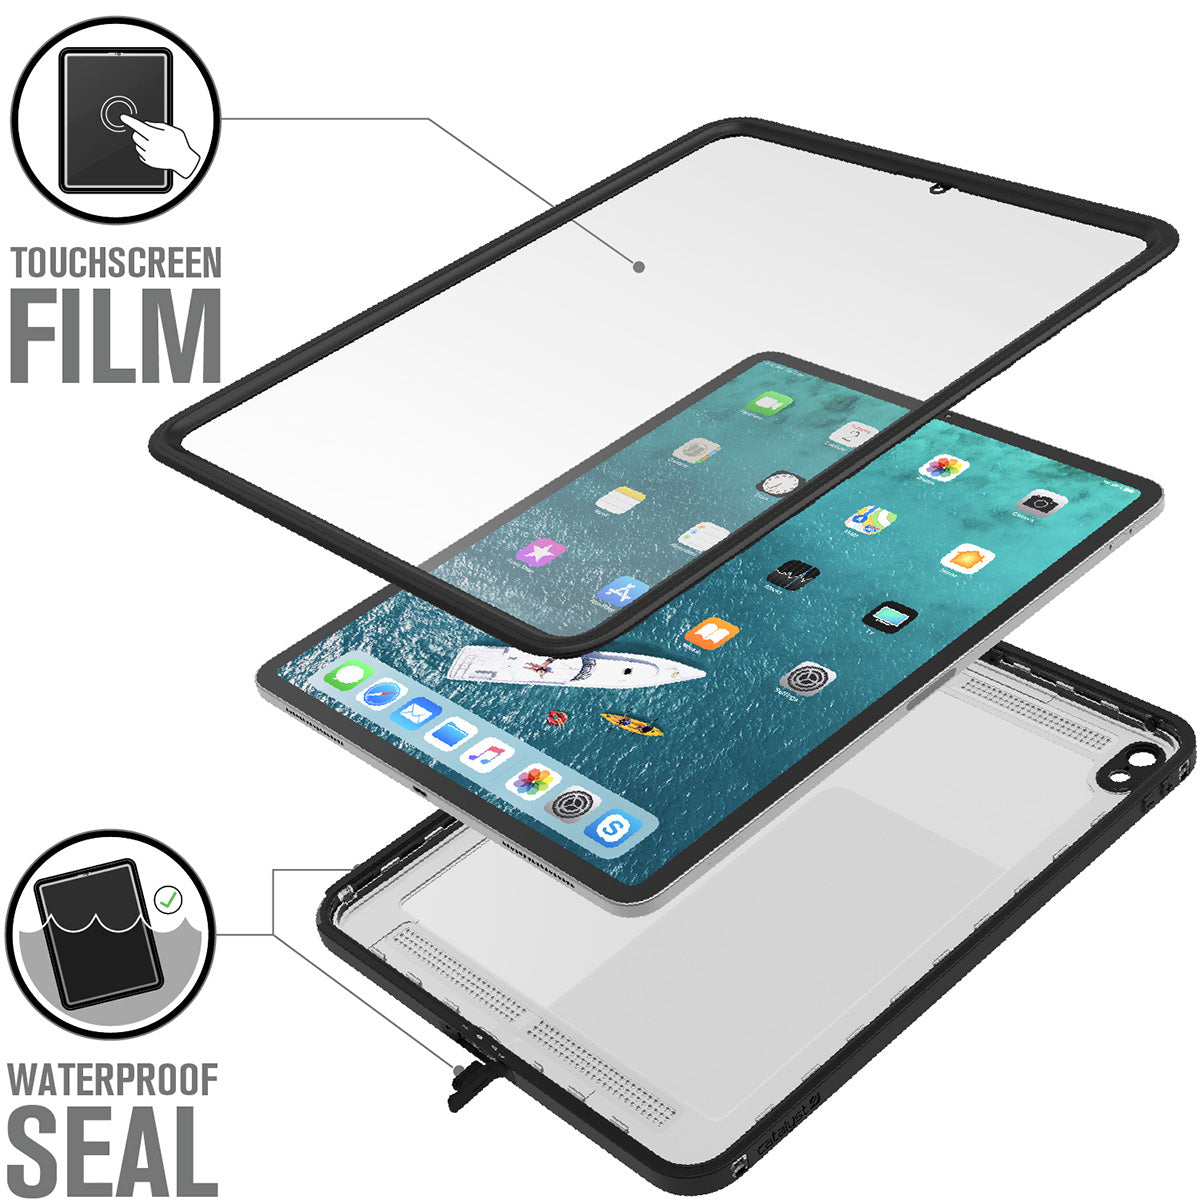 Catalyst waterproof case for ipad pro gen 3 12.9in black front and back protectionText reads touchscreen film waterproof seal